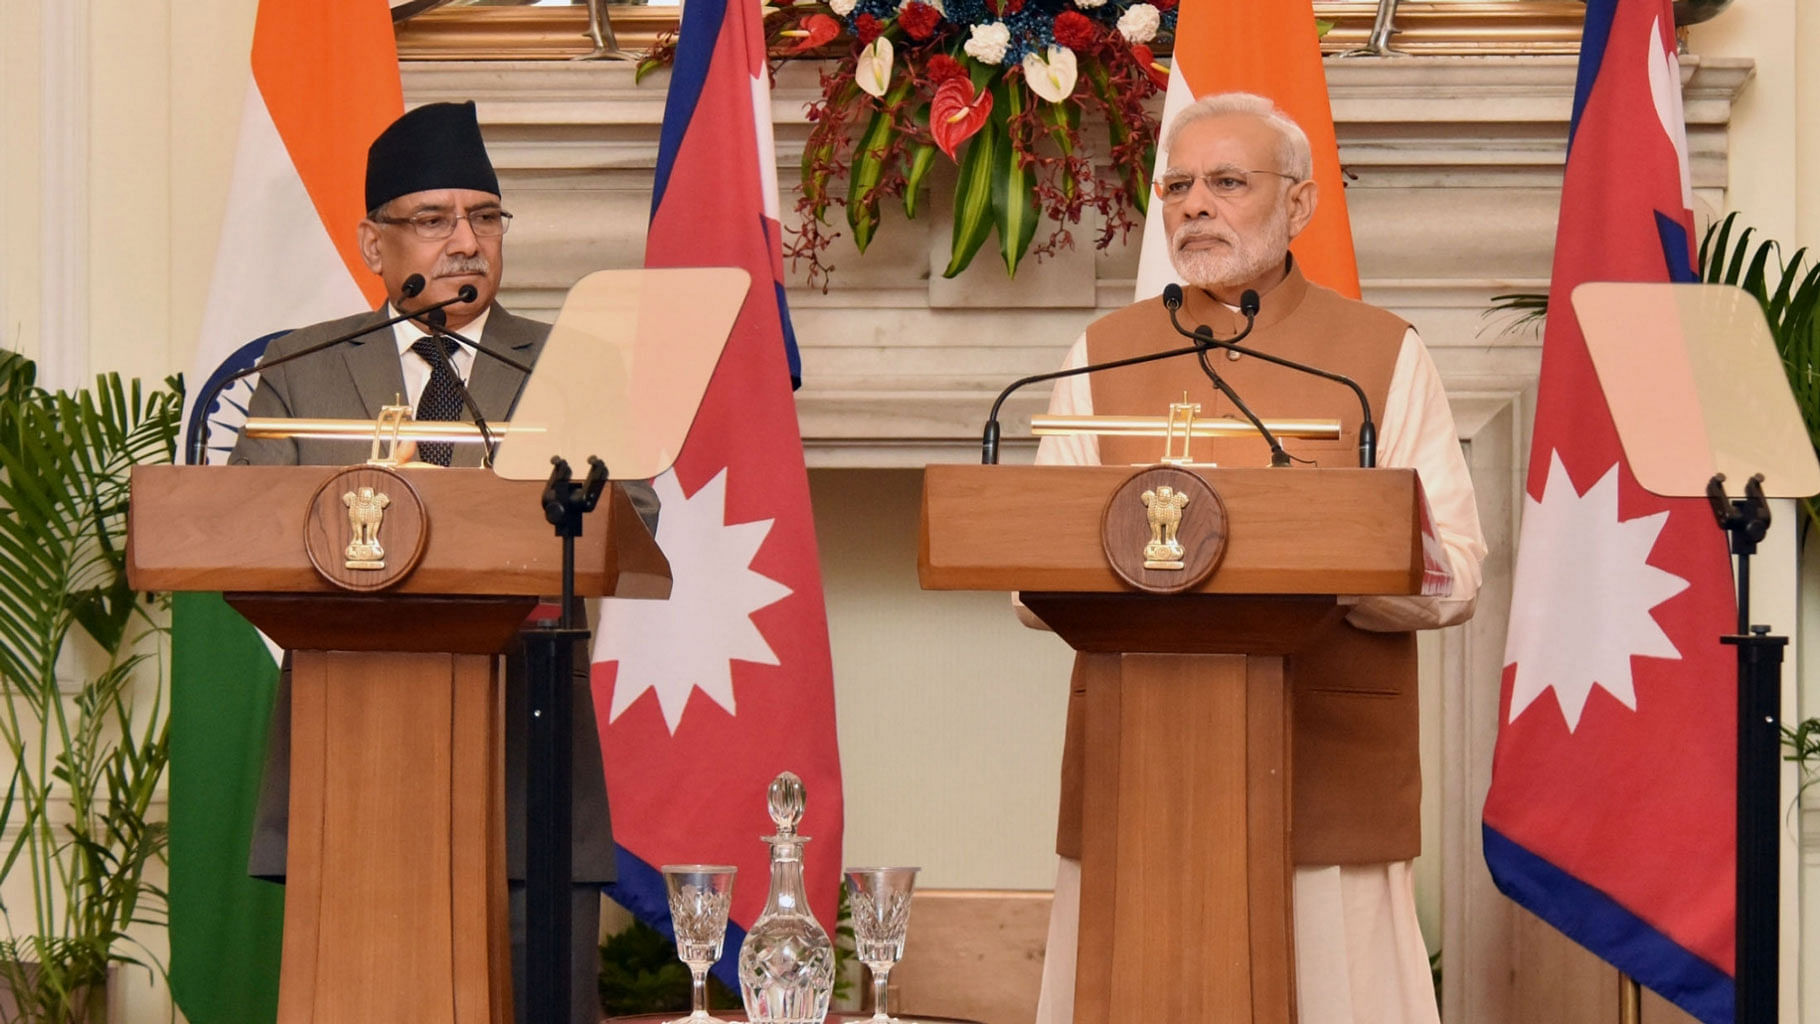 Nepalese PM Prachanda and PM Modi. ‘Global Times’ wrote China “feels tricked” that Nepal relied on Beijing to reduce dependence on India but dumped China later. (Photo: IANS)